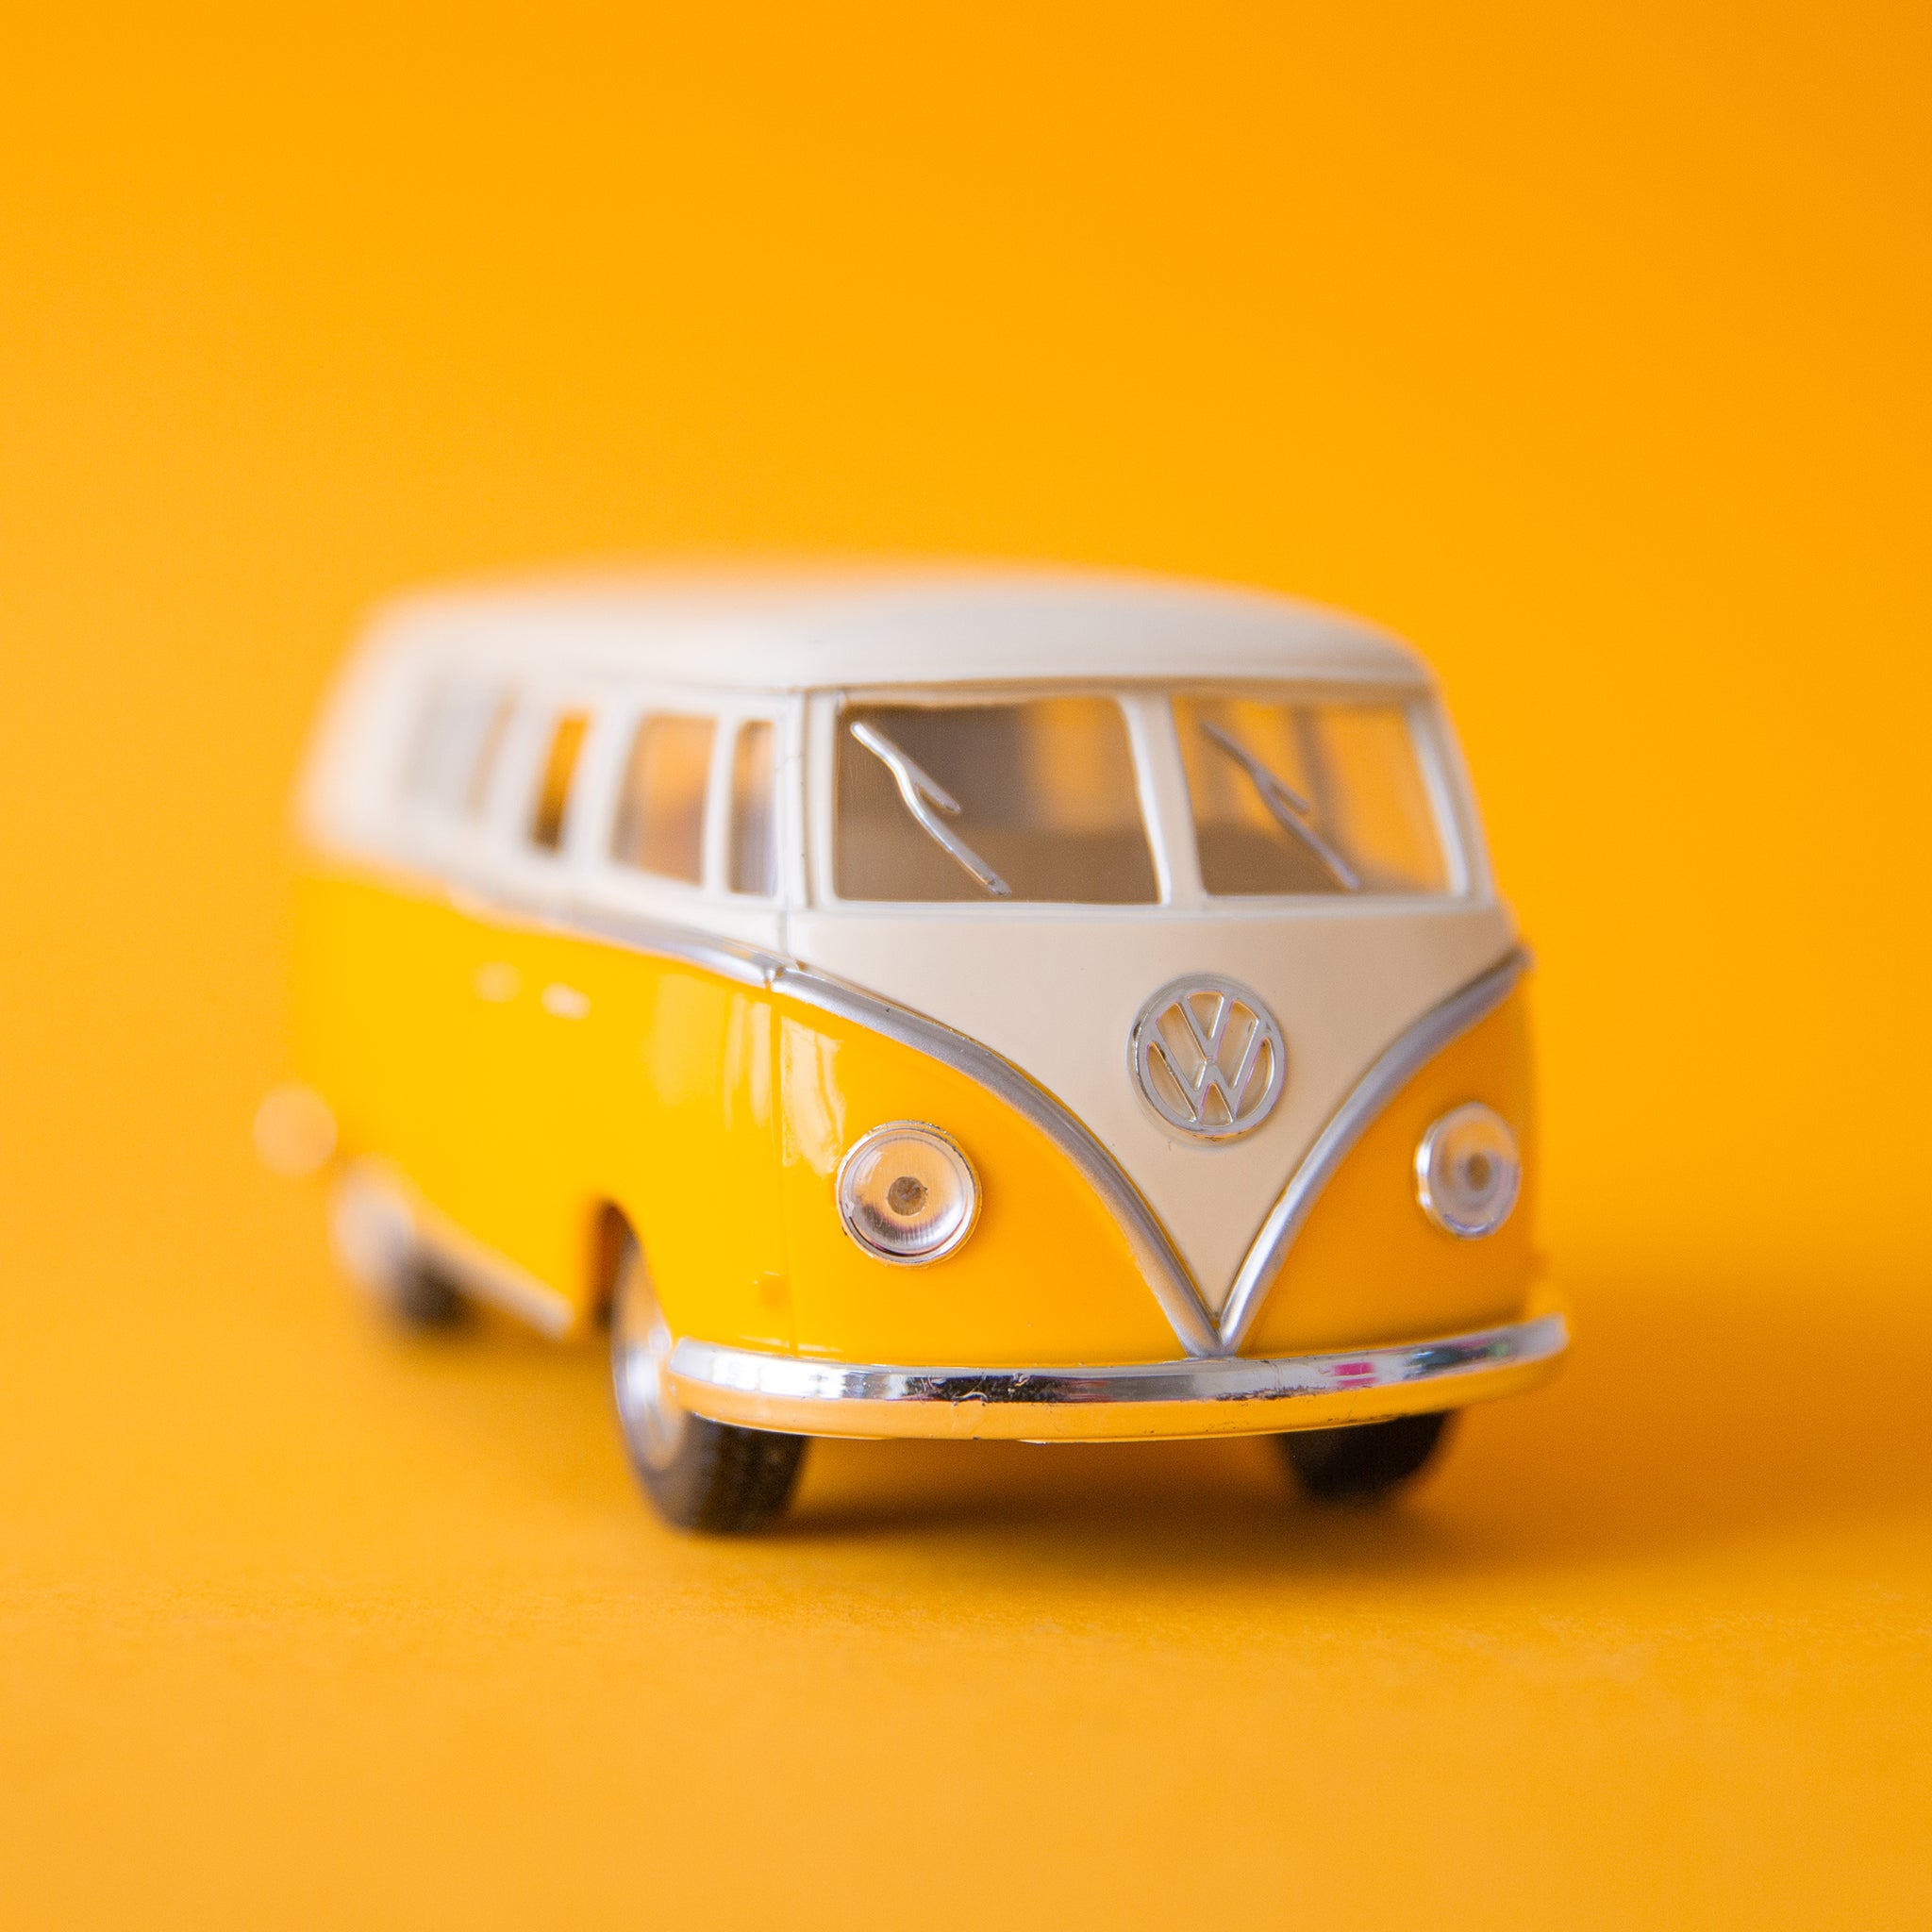 On a yellow background is a yellow and white VW bus toy. 